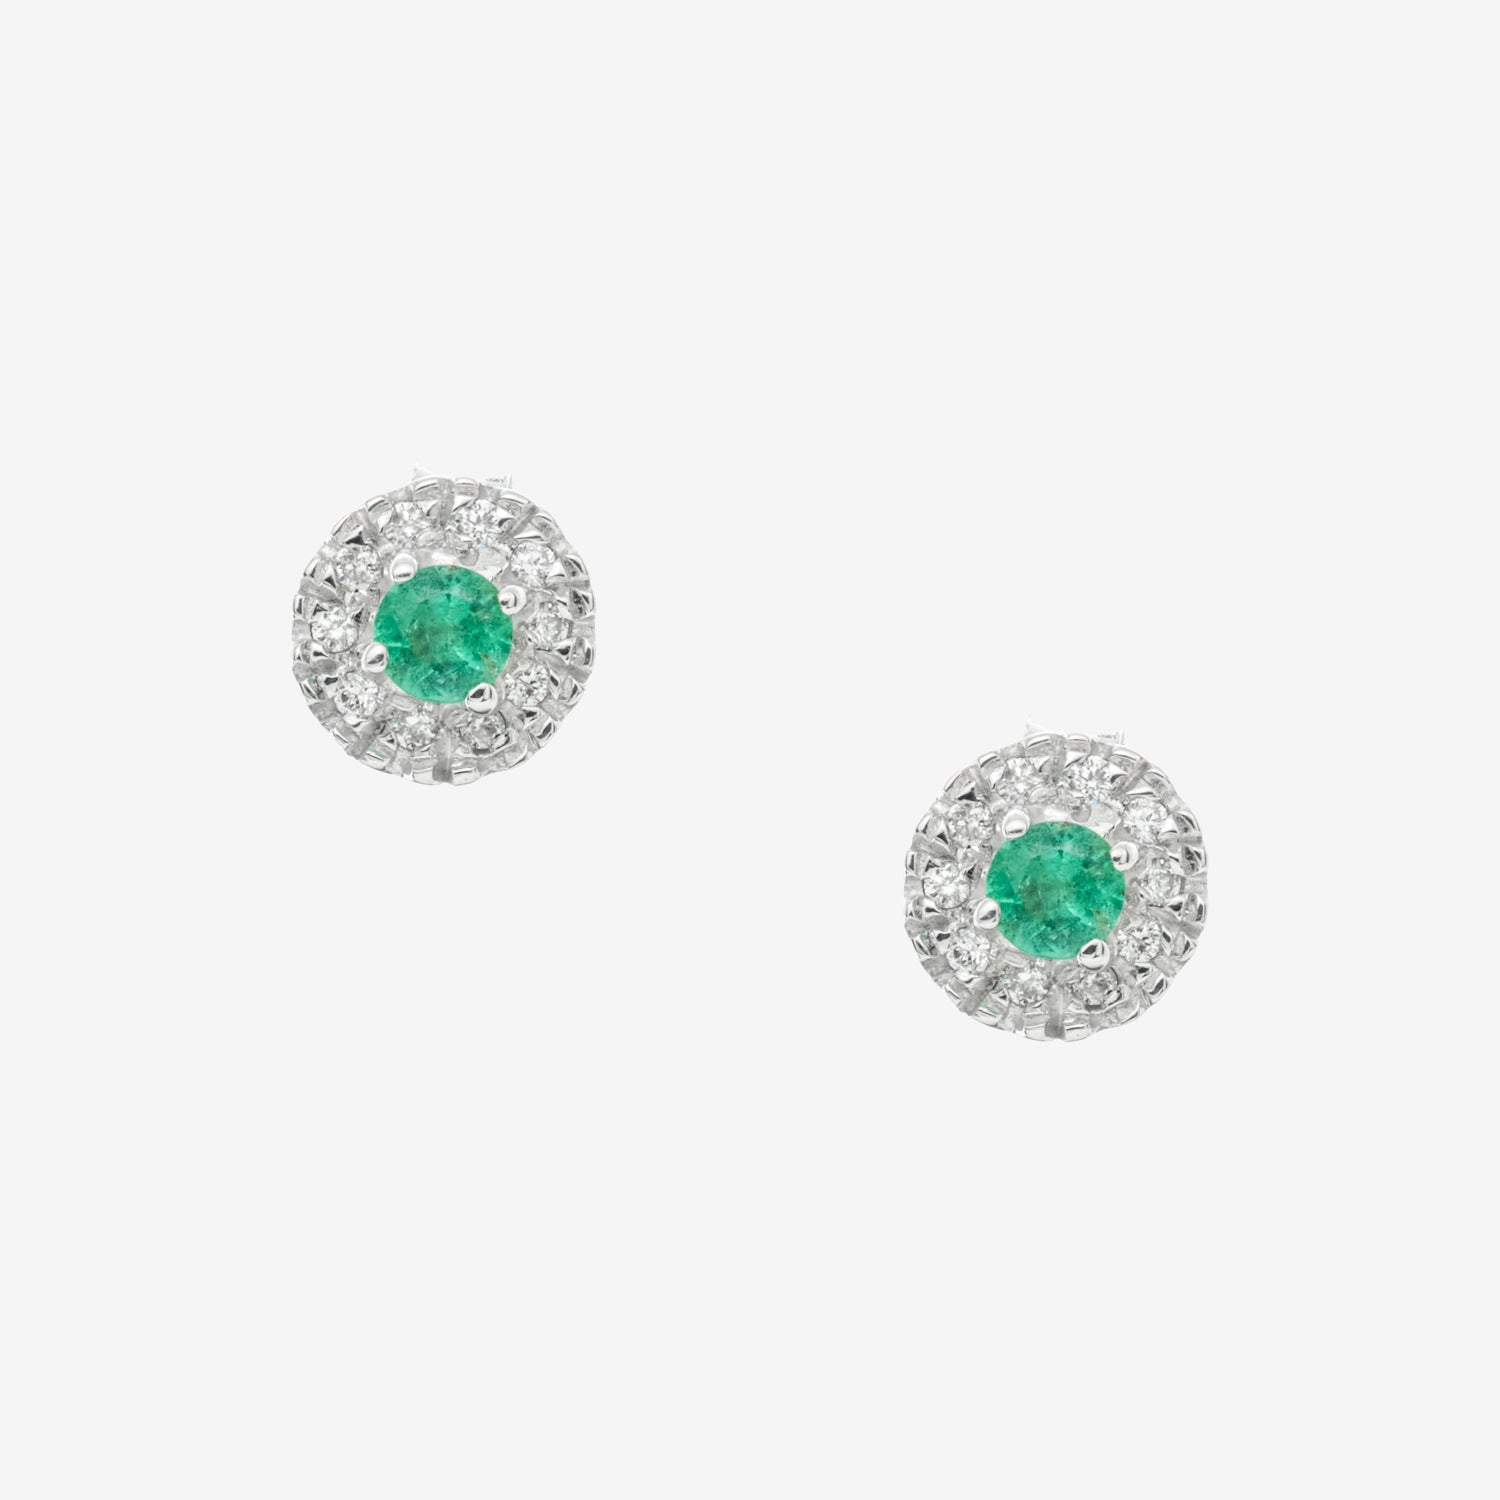 EMERALD DOTS EARRINGS WITH DIAMONDS AND EMERALDS